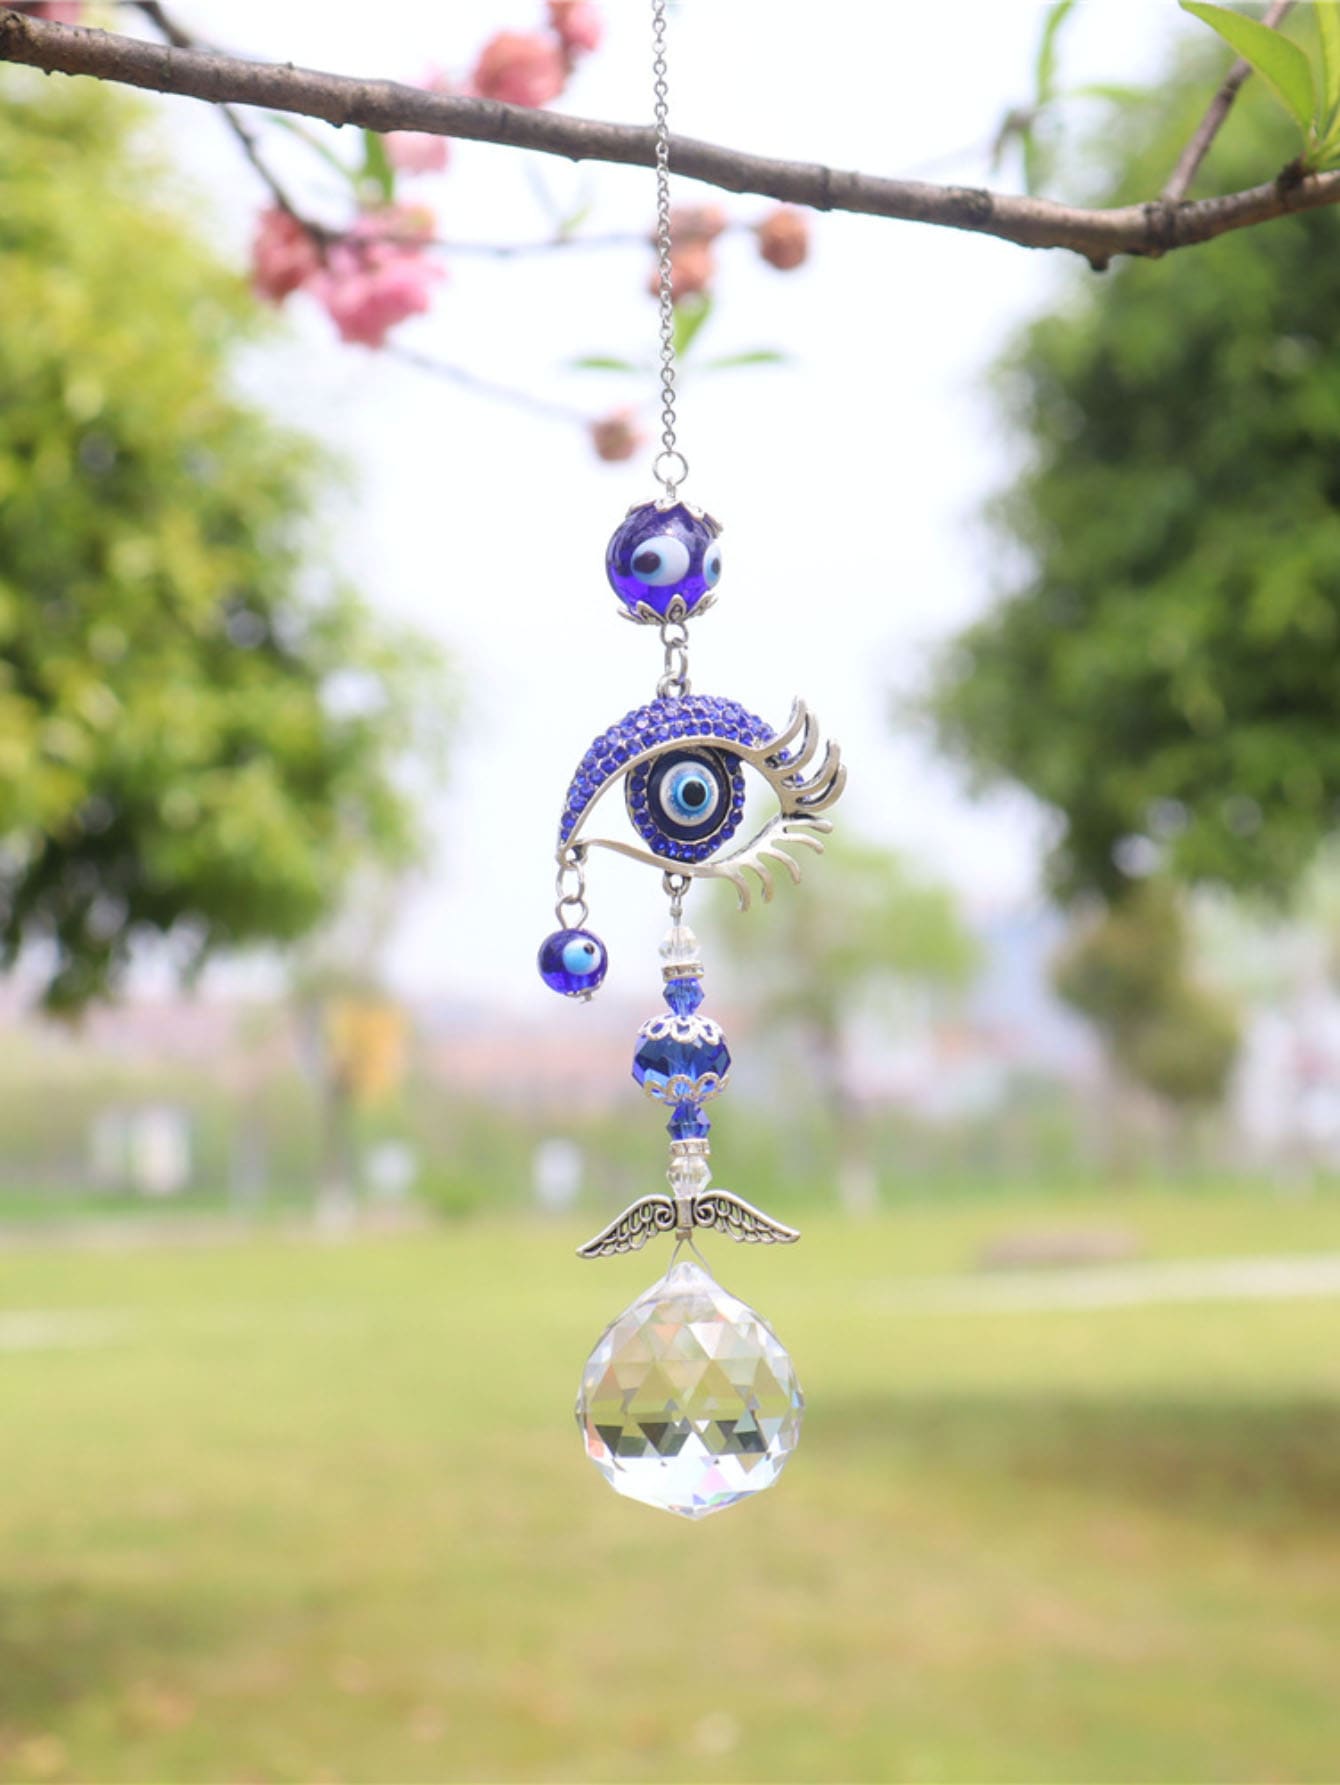 Crystal Sun Catcher Light Decor Hanging Ornament For Courtyard And Garden Decoration, Light Shadow Wind Chime 1pc